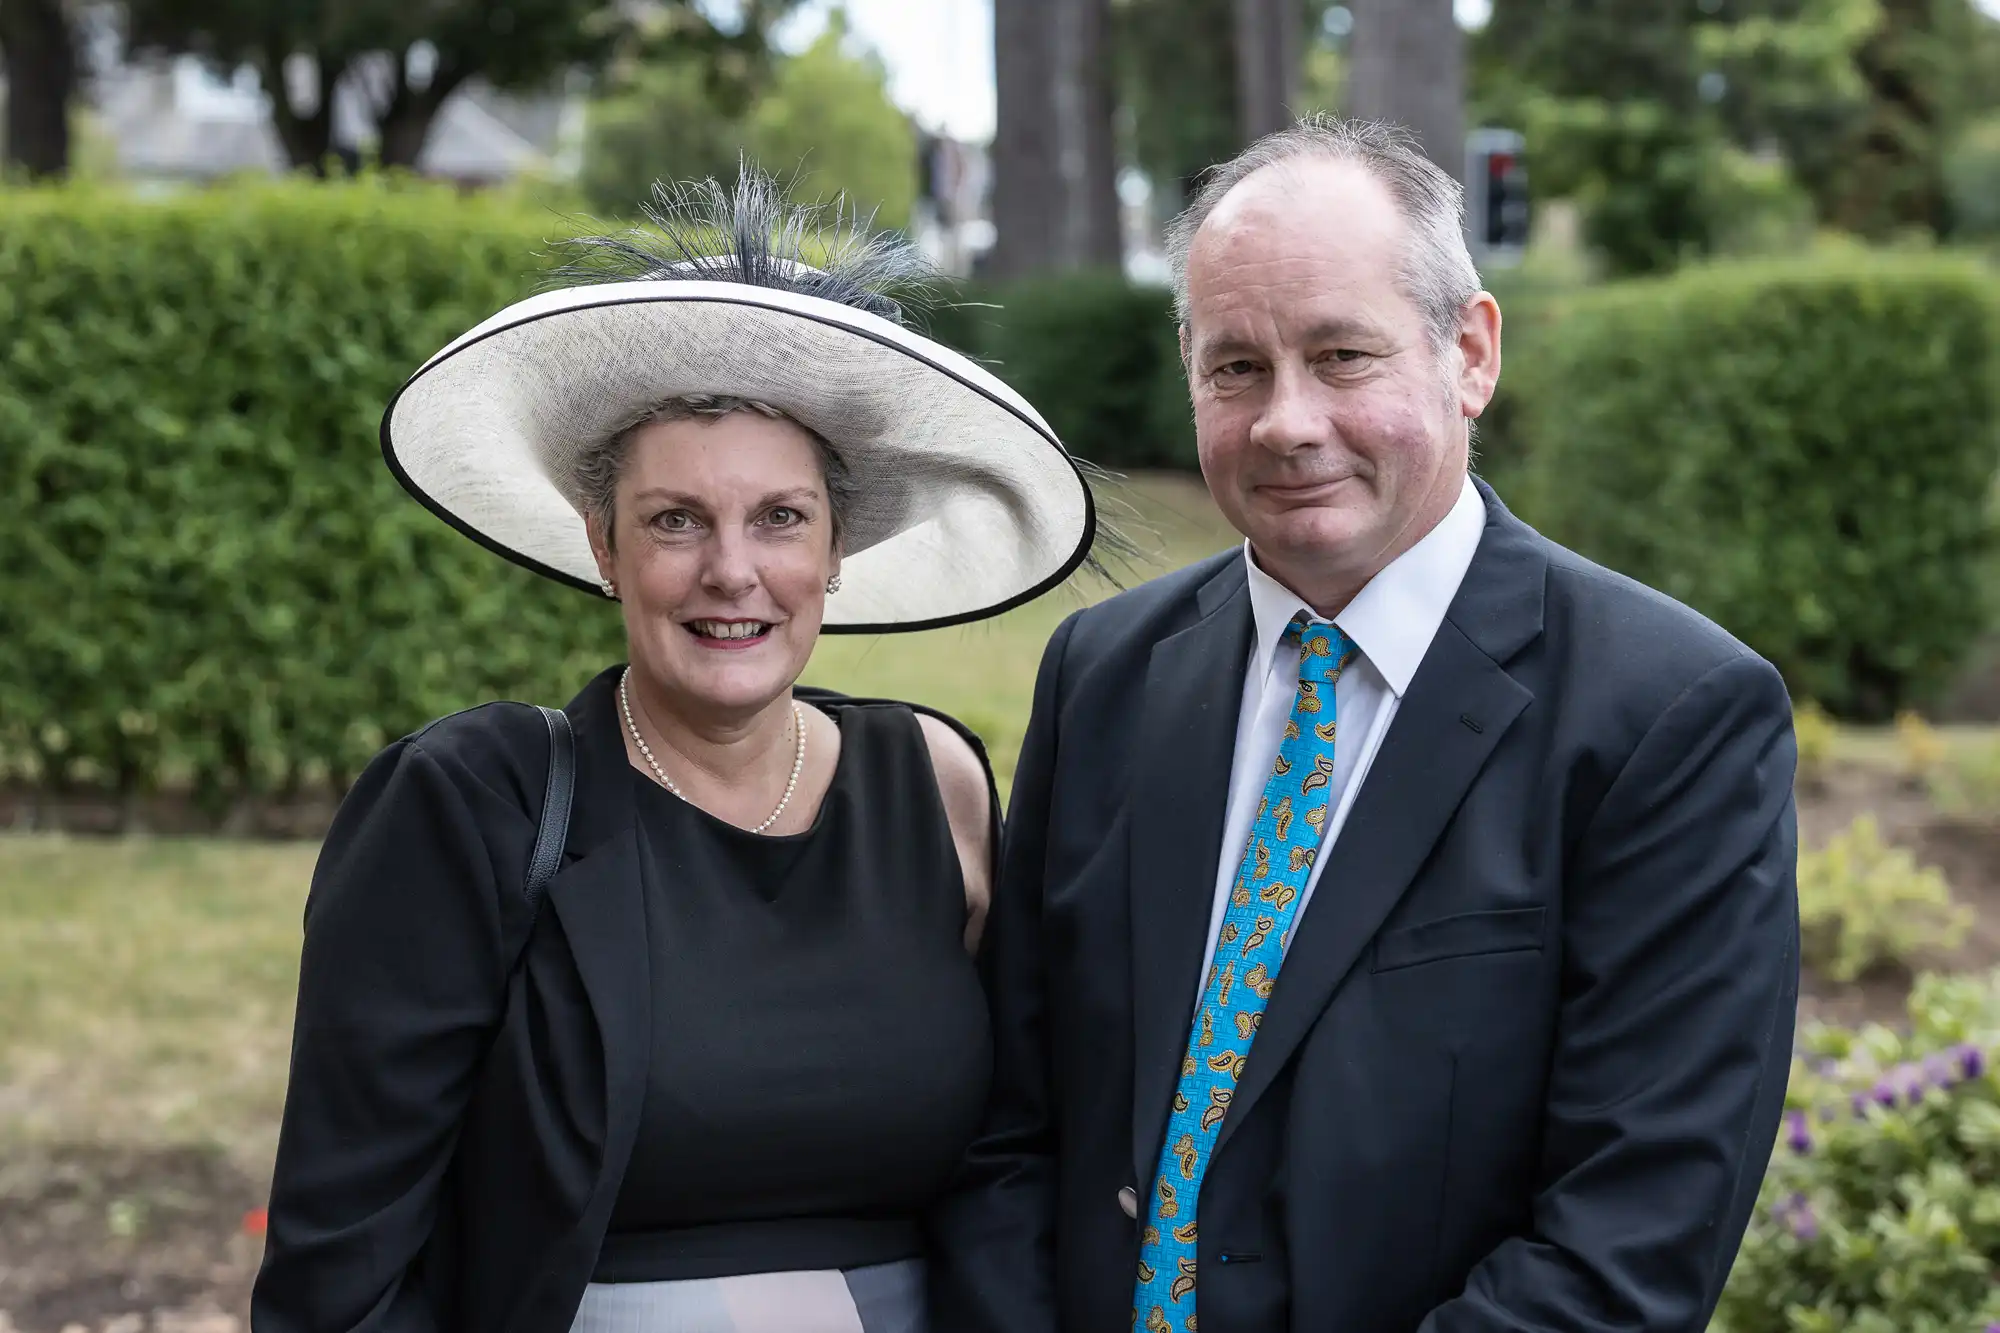 A mature couple, the woman wearing a wide-brimmed hat and black dress, the man in a navy suit with a patterned tie, standing together in a garden.